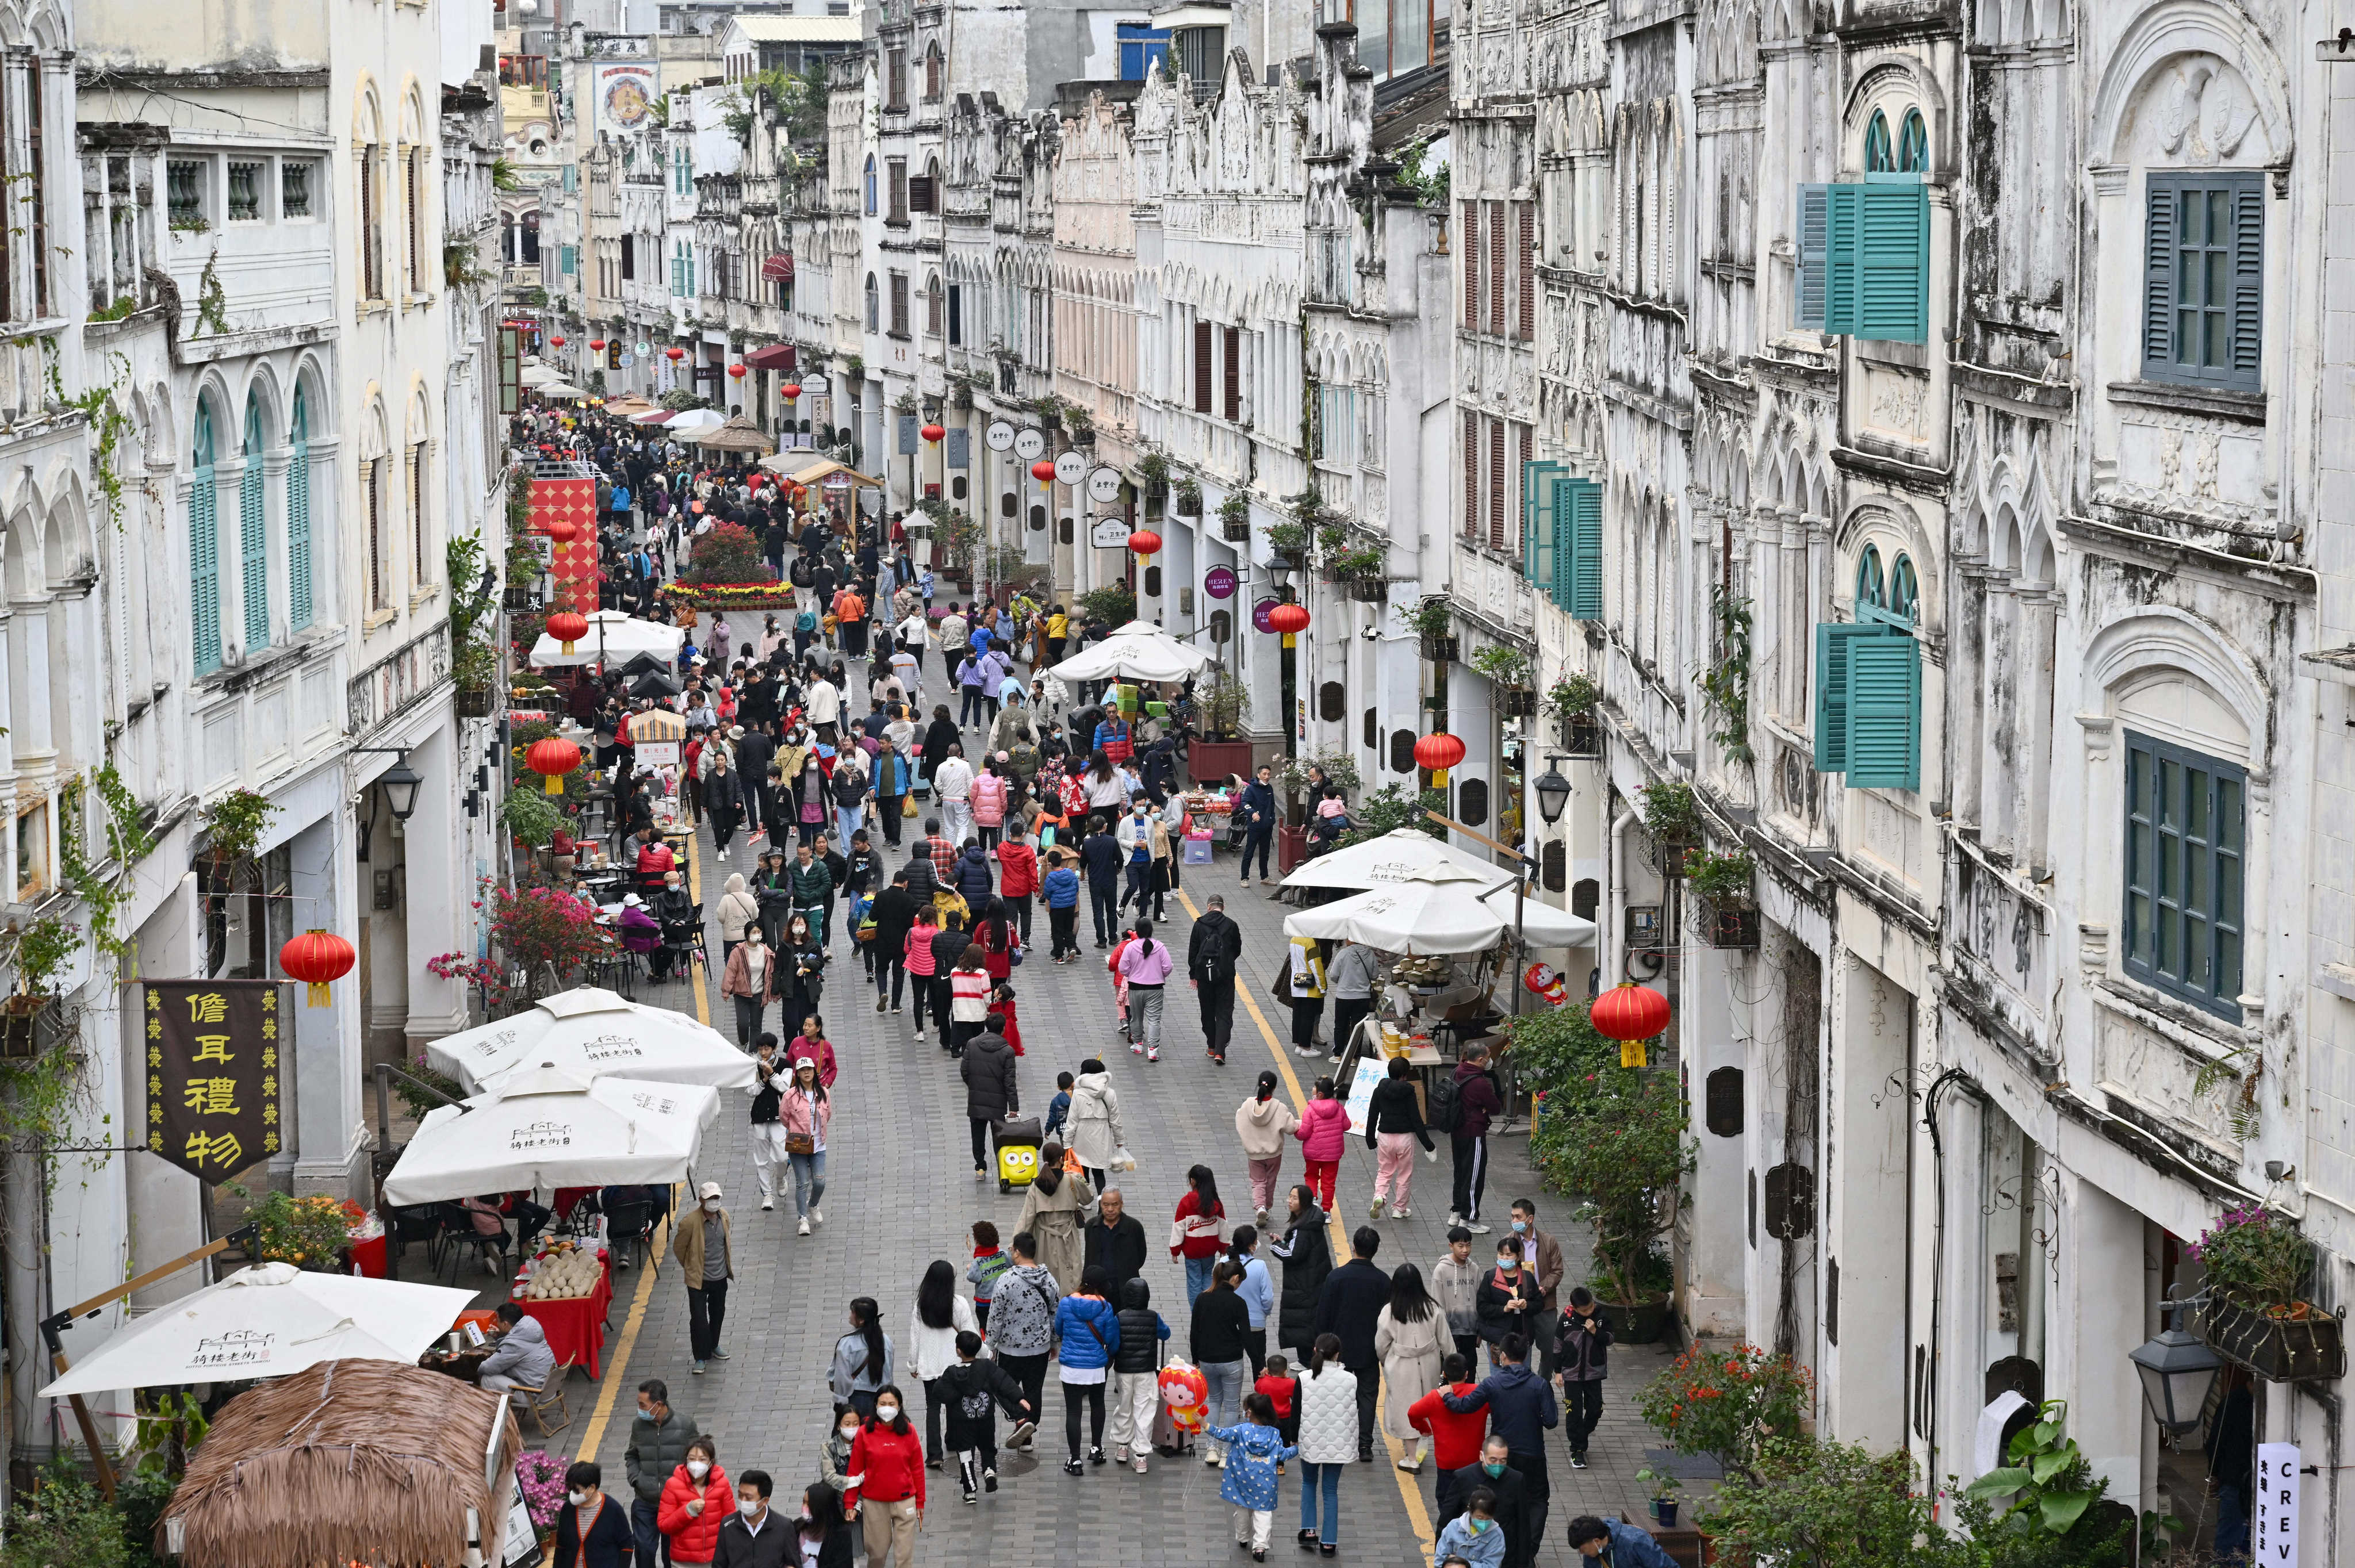 The Qilou ancient street in Haikou, in China’s southern Hainan province. Photo: Xinhua